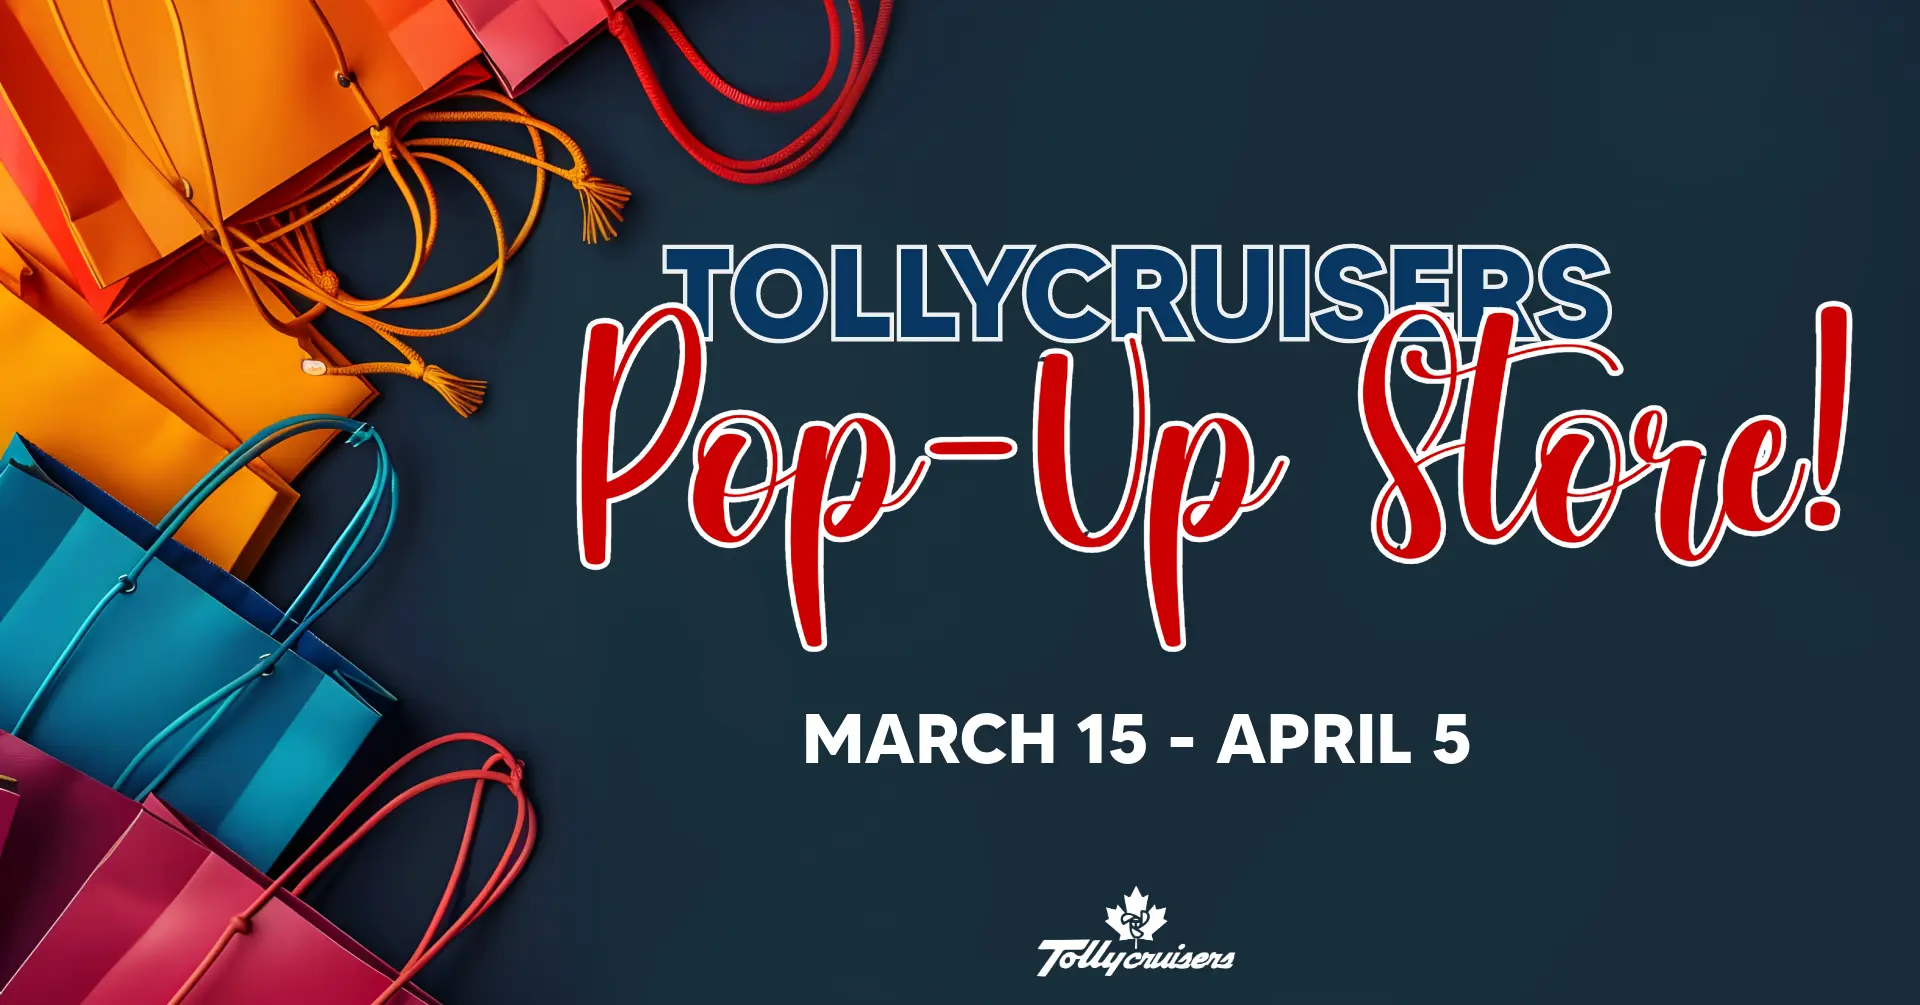 Tollycruisers Pop-Up Store